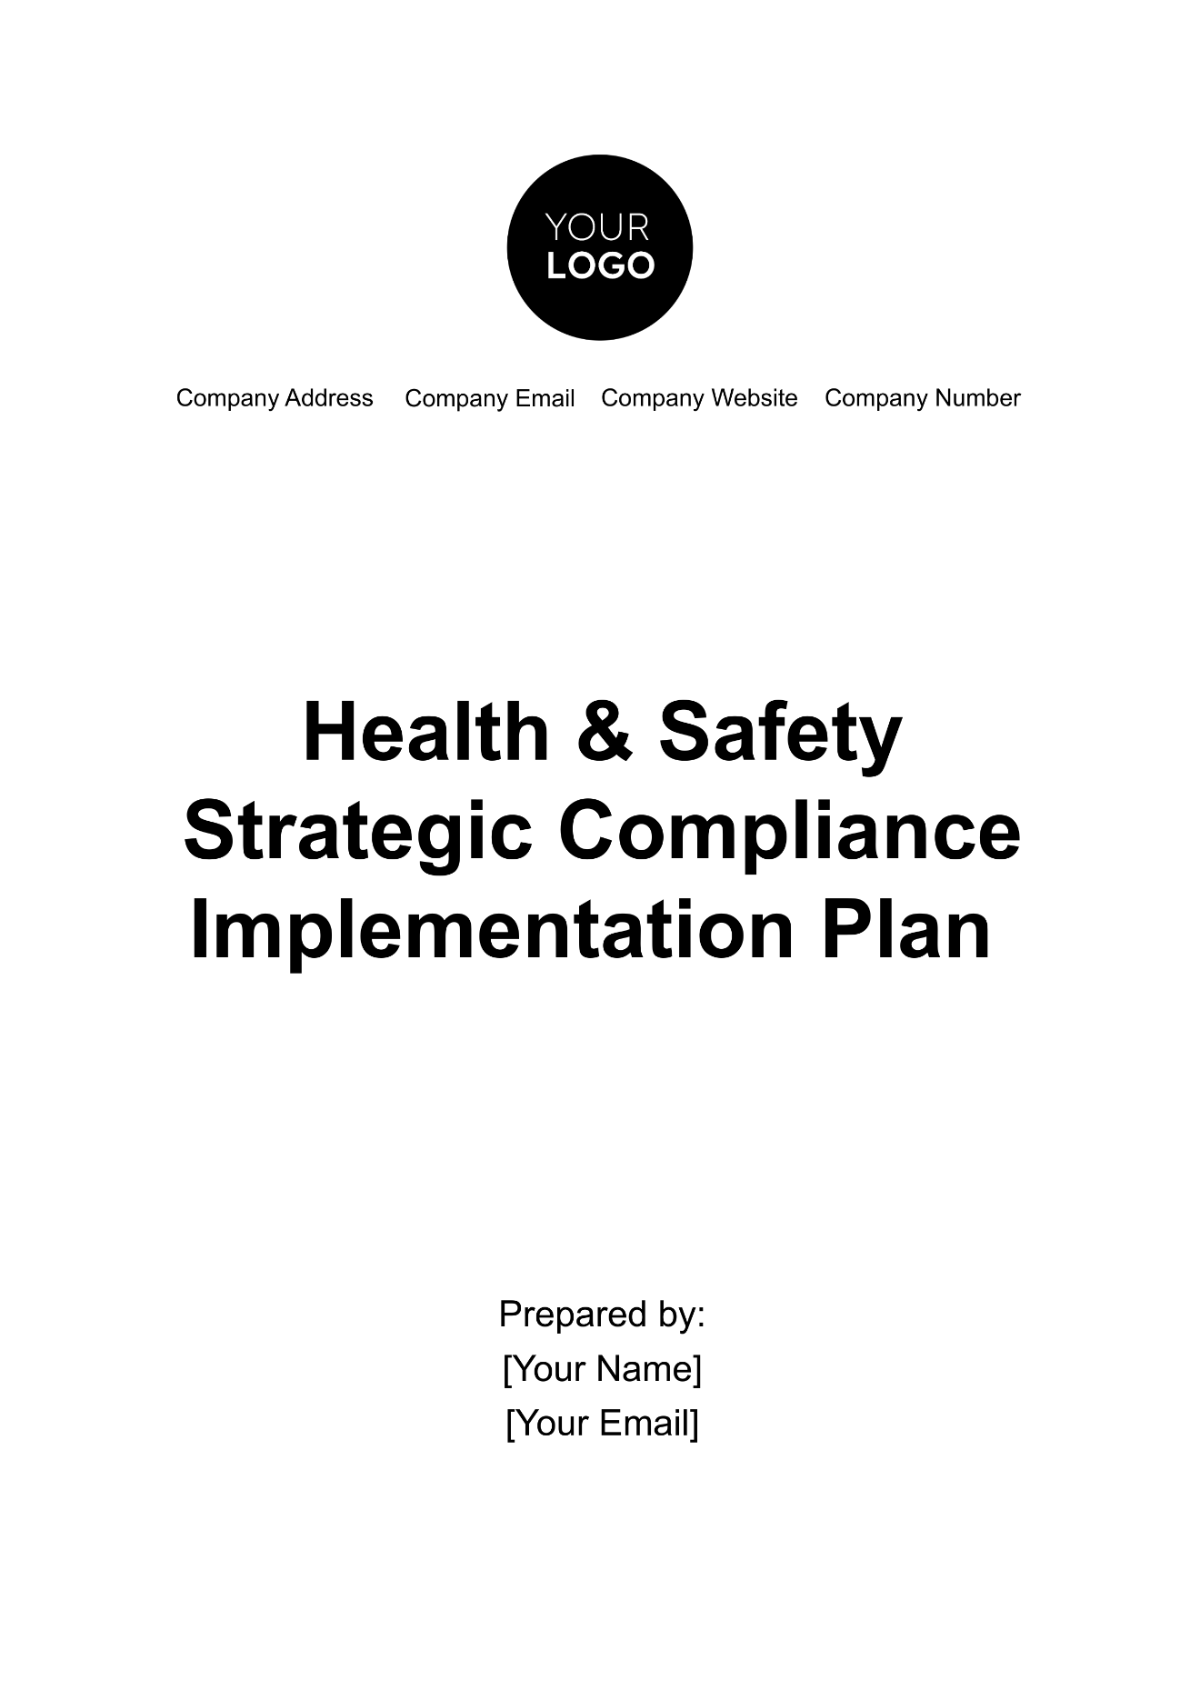 Free Health & Safety Strategic Compliance Implementation Plan Template